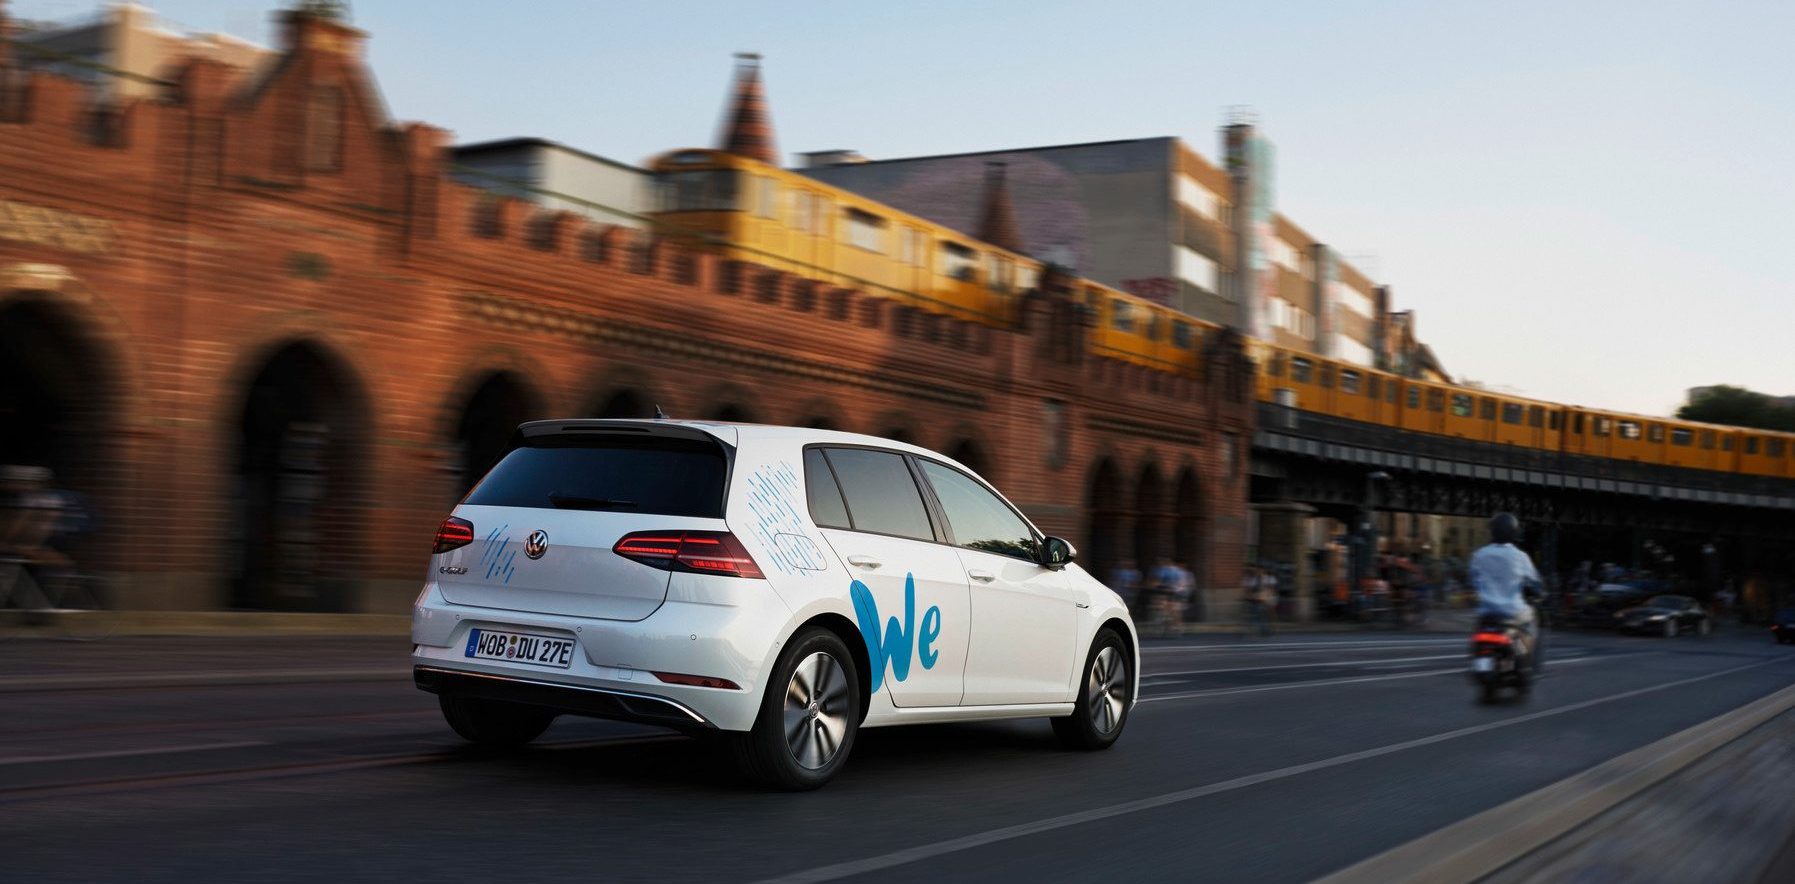 VW will deploy 2,000 electric cars in Berlin for a new car sharing